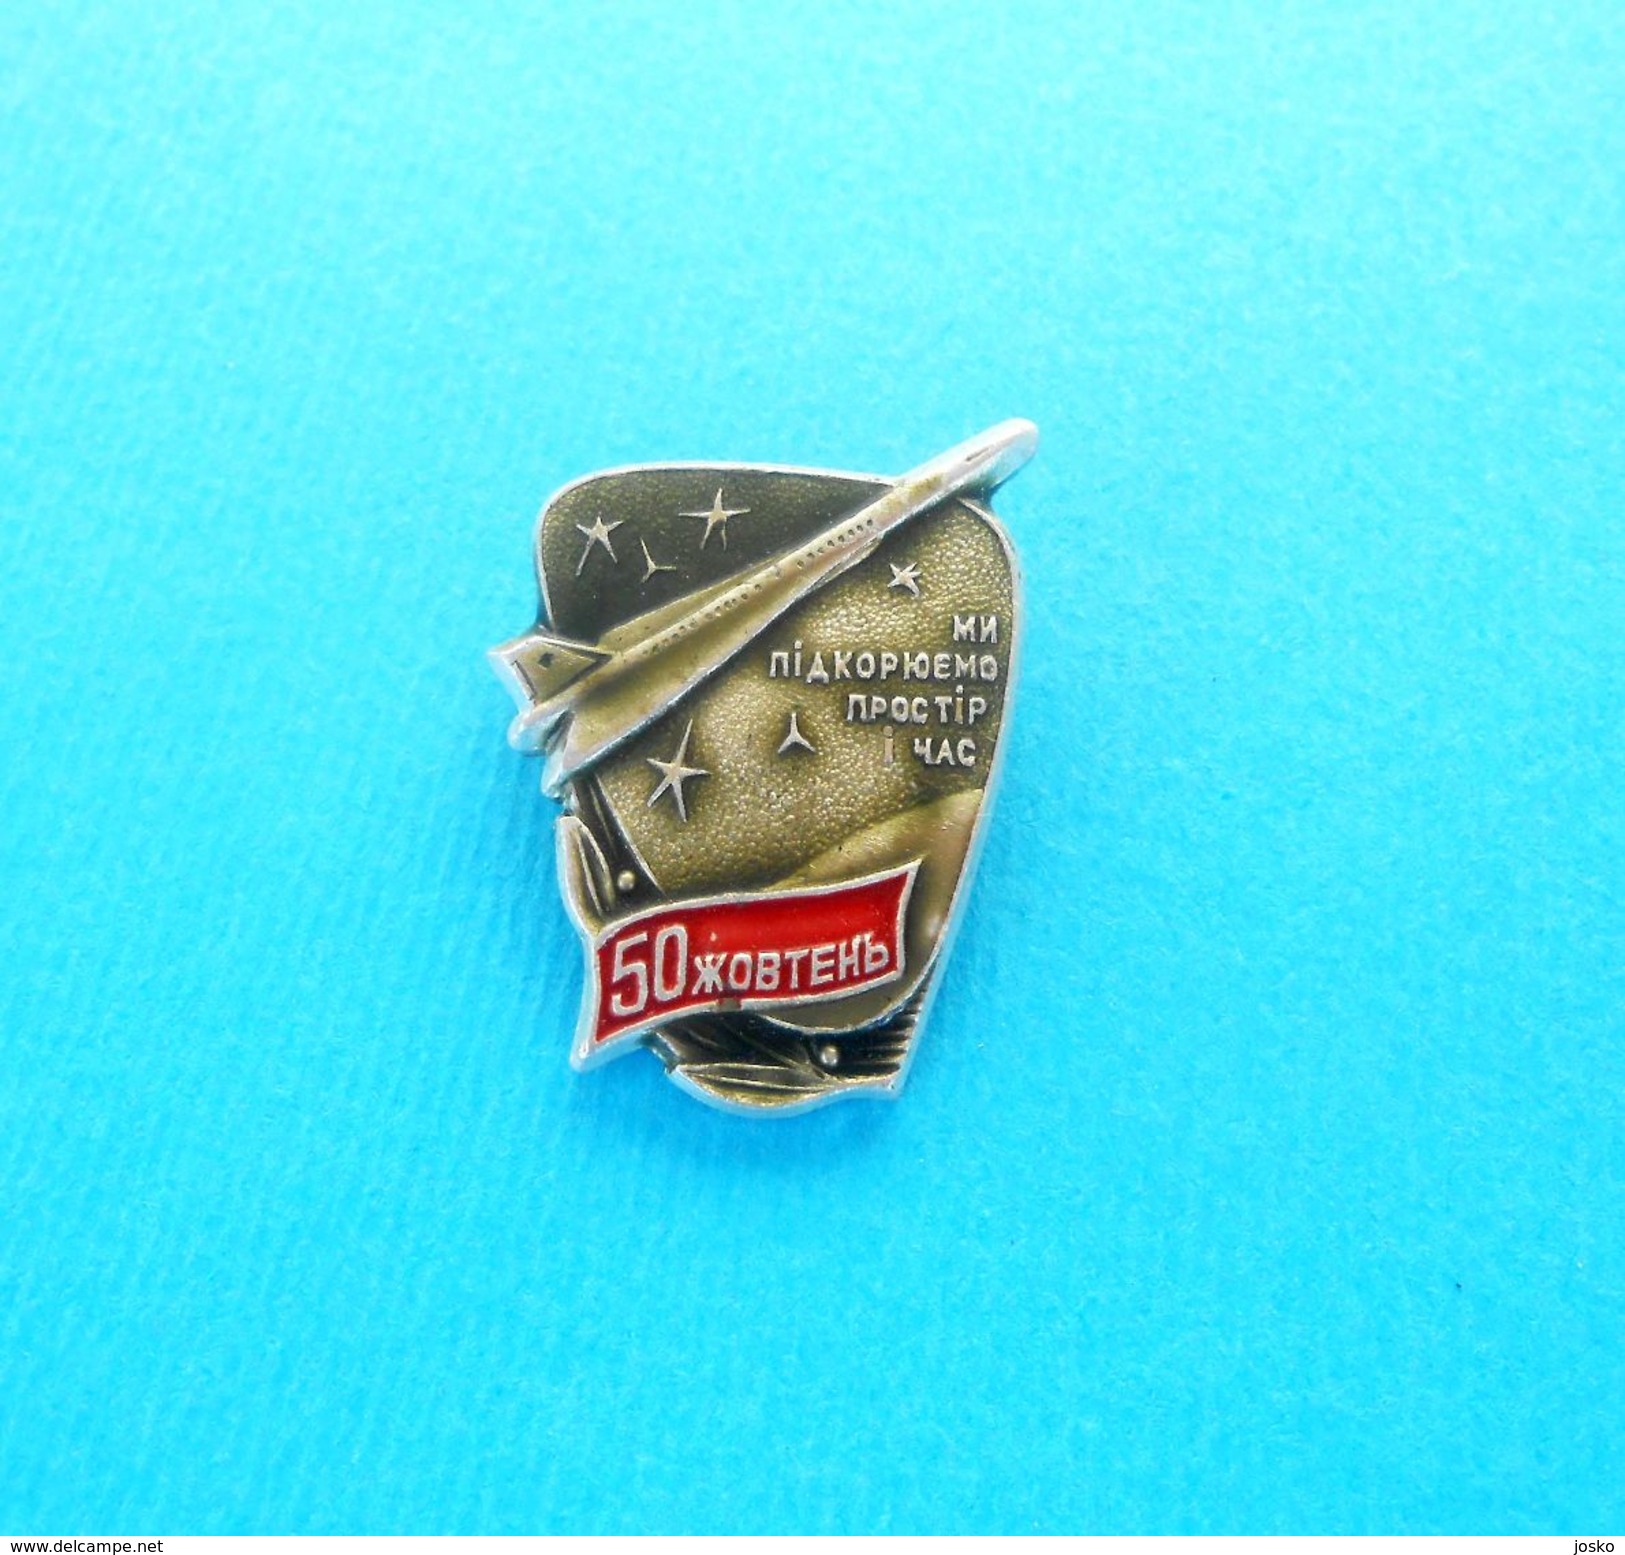 SOVIET SPACE PROGRAMME ( Russia CCCP ) - Vintage Pin Badge Espace Cosmos Universe Univers Weltall Universum Universo - Space